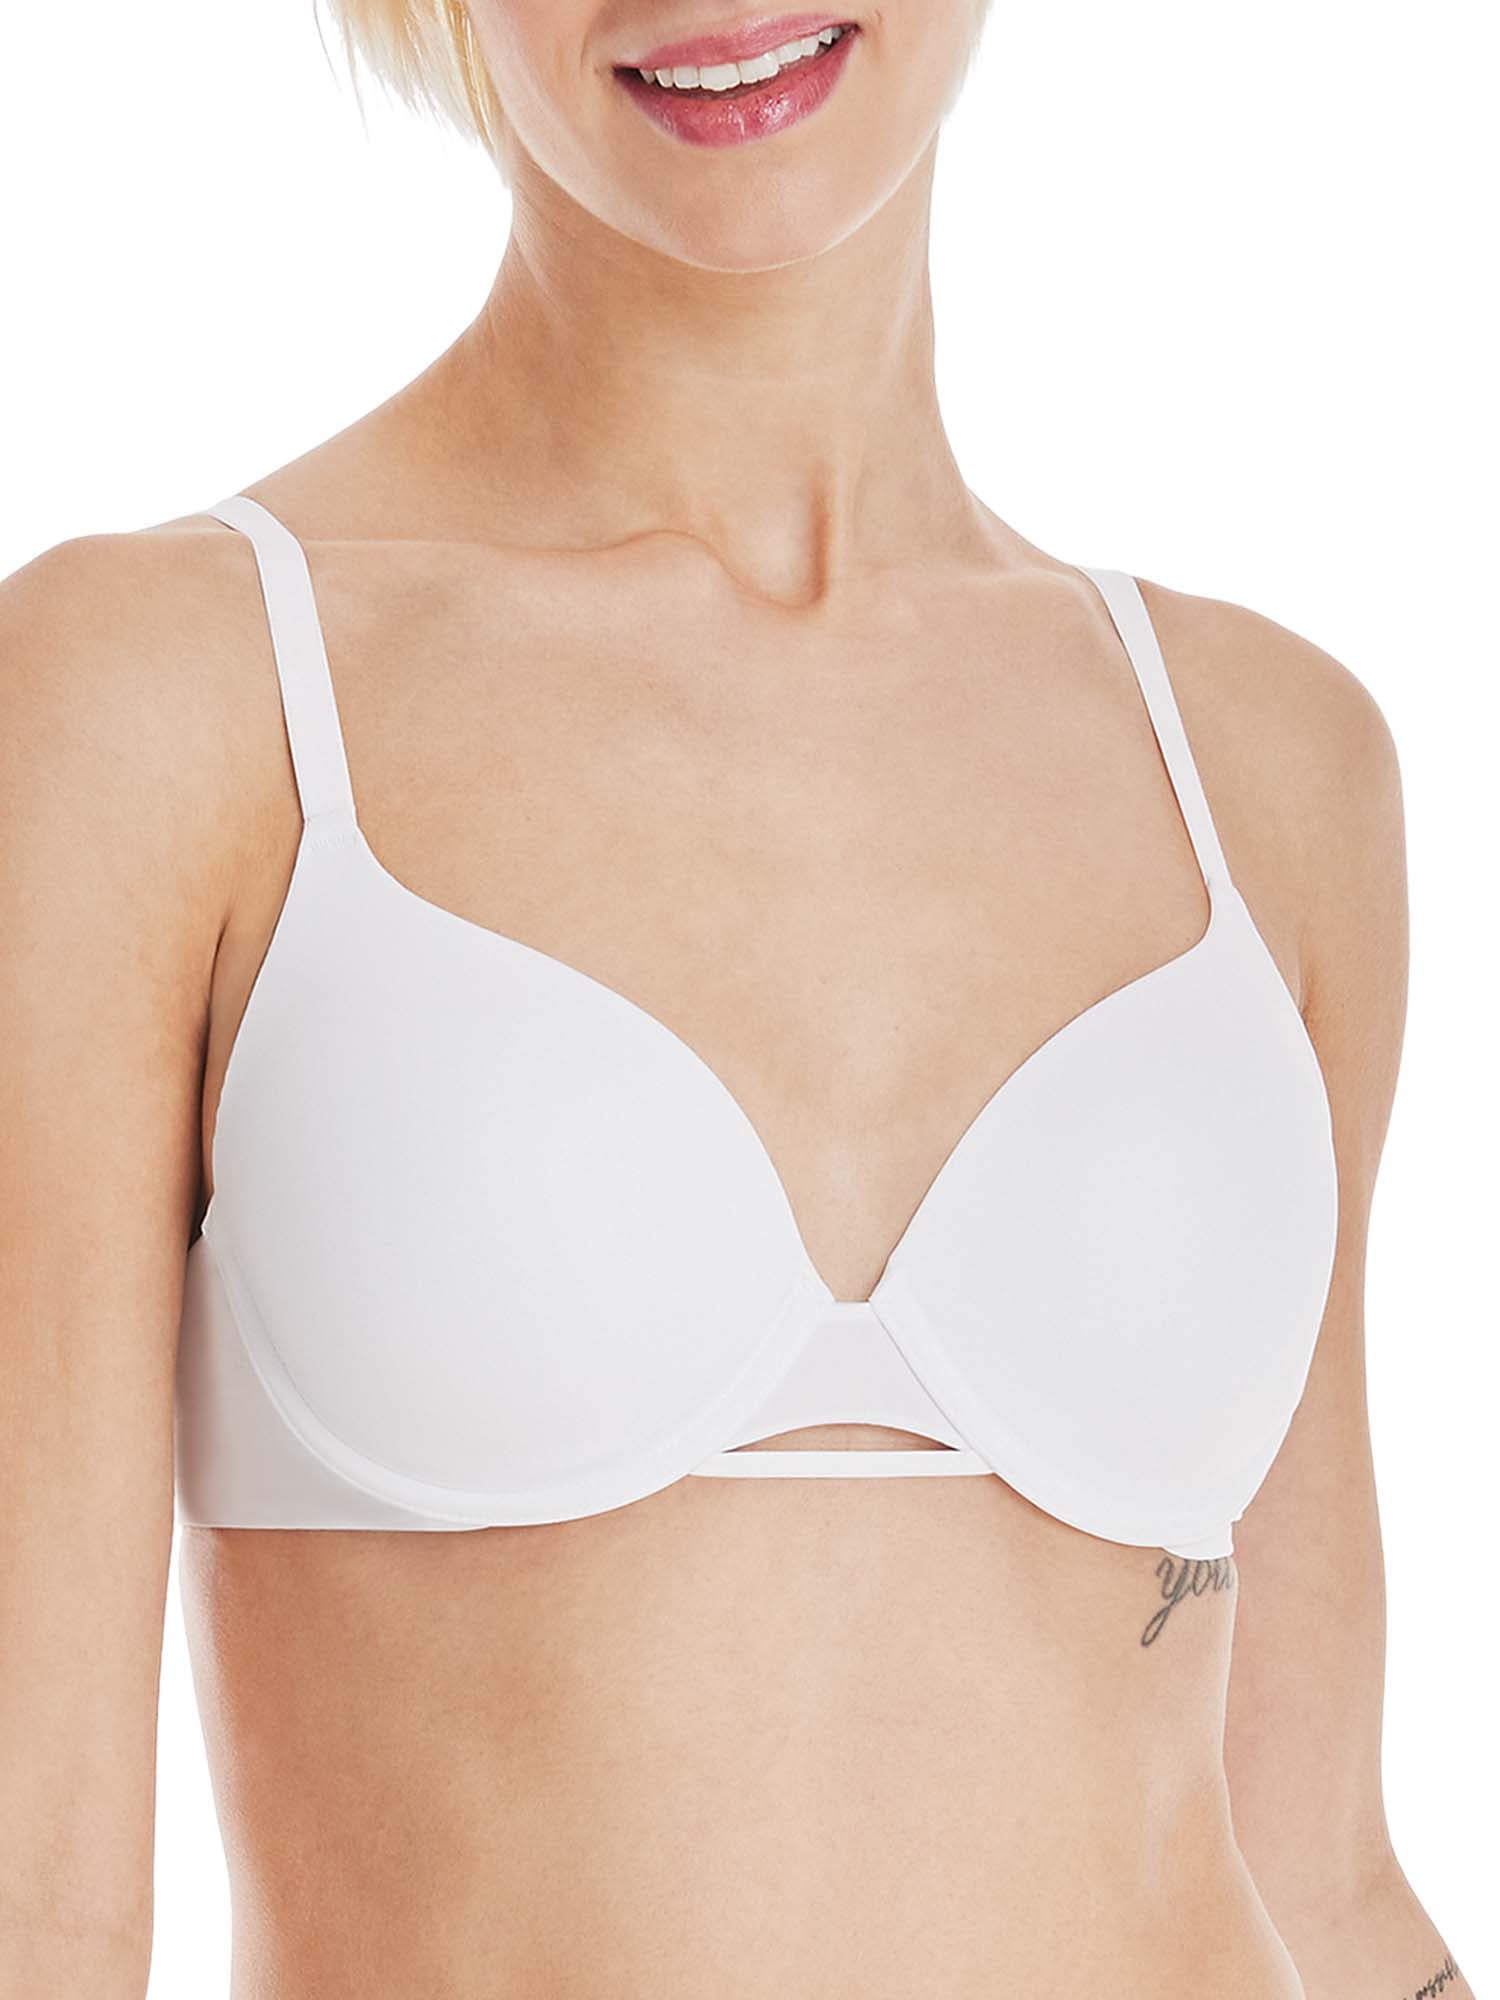 Lilian Wired 5/8 Moulded T-Shirt Bra - B Cup Size 83-1103